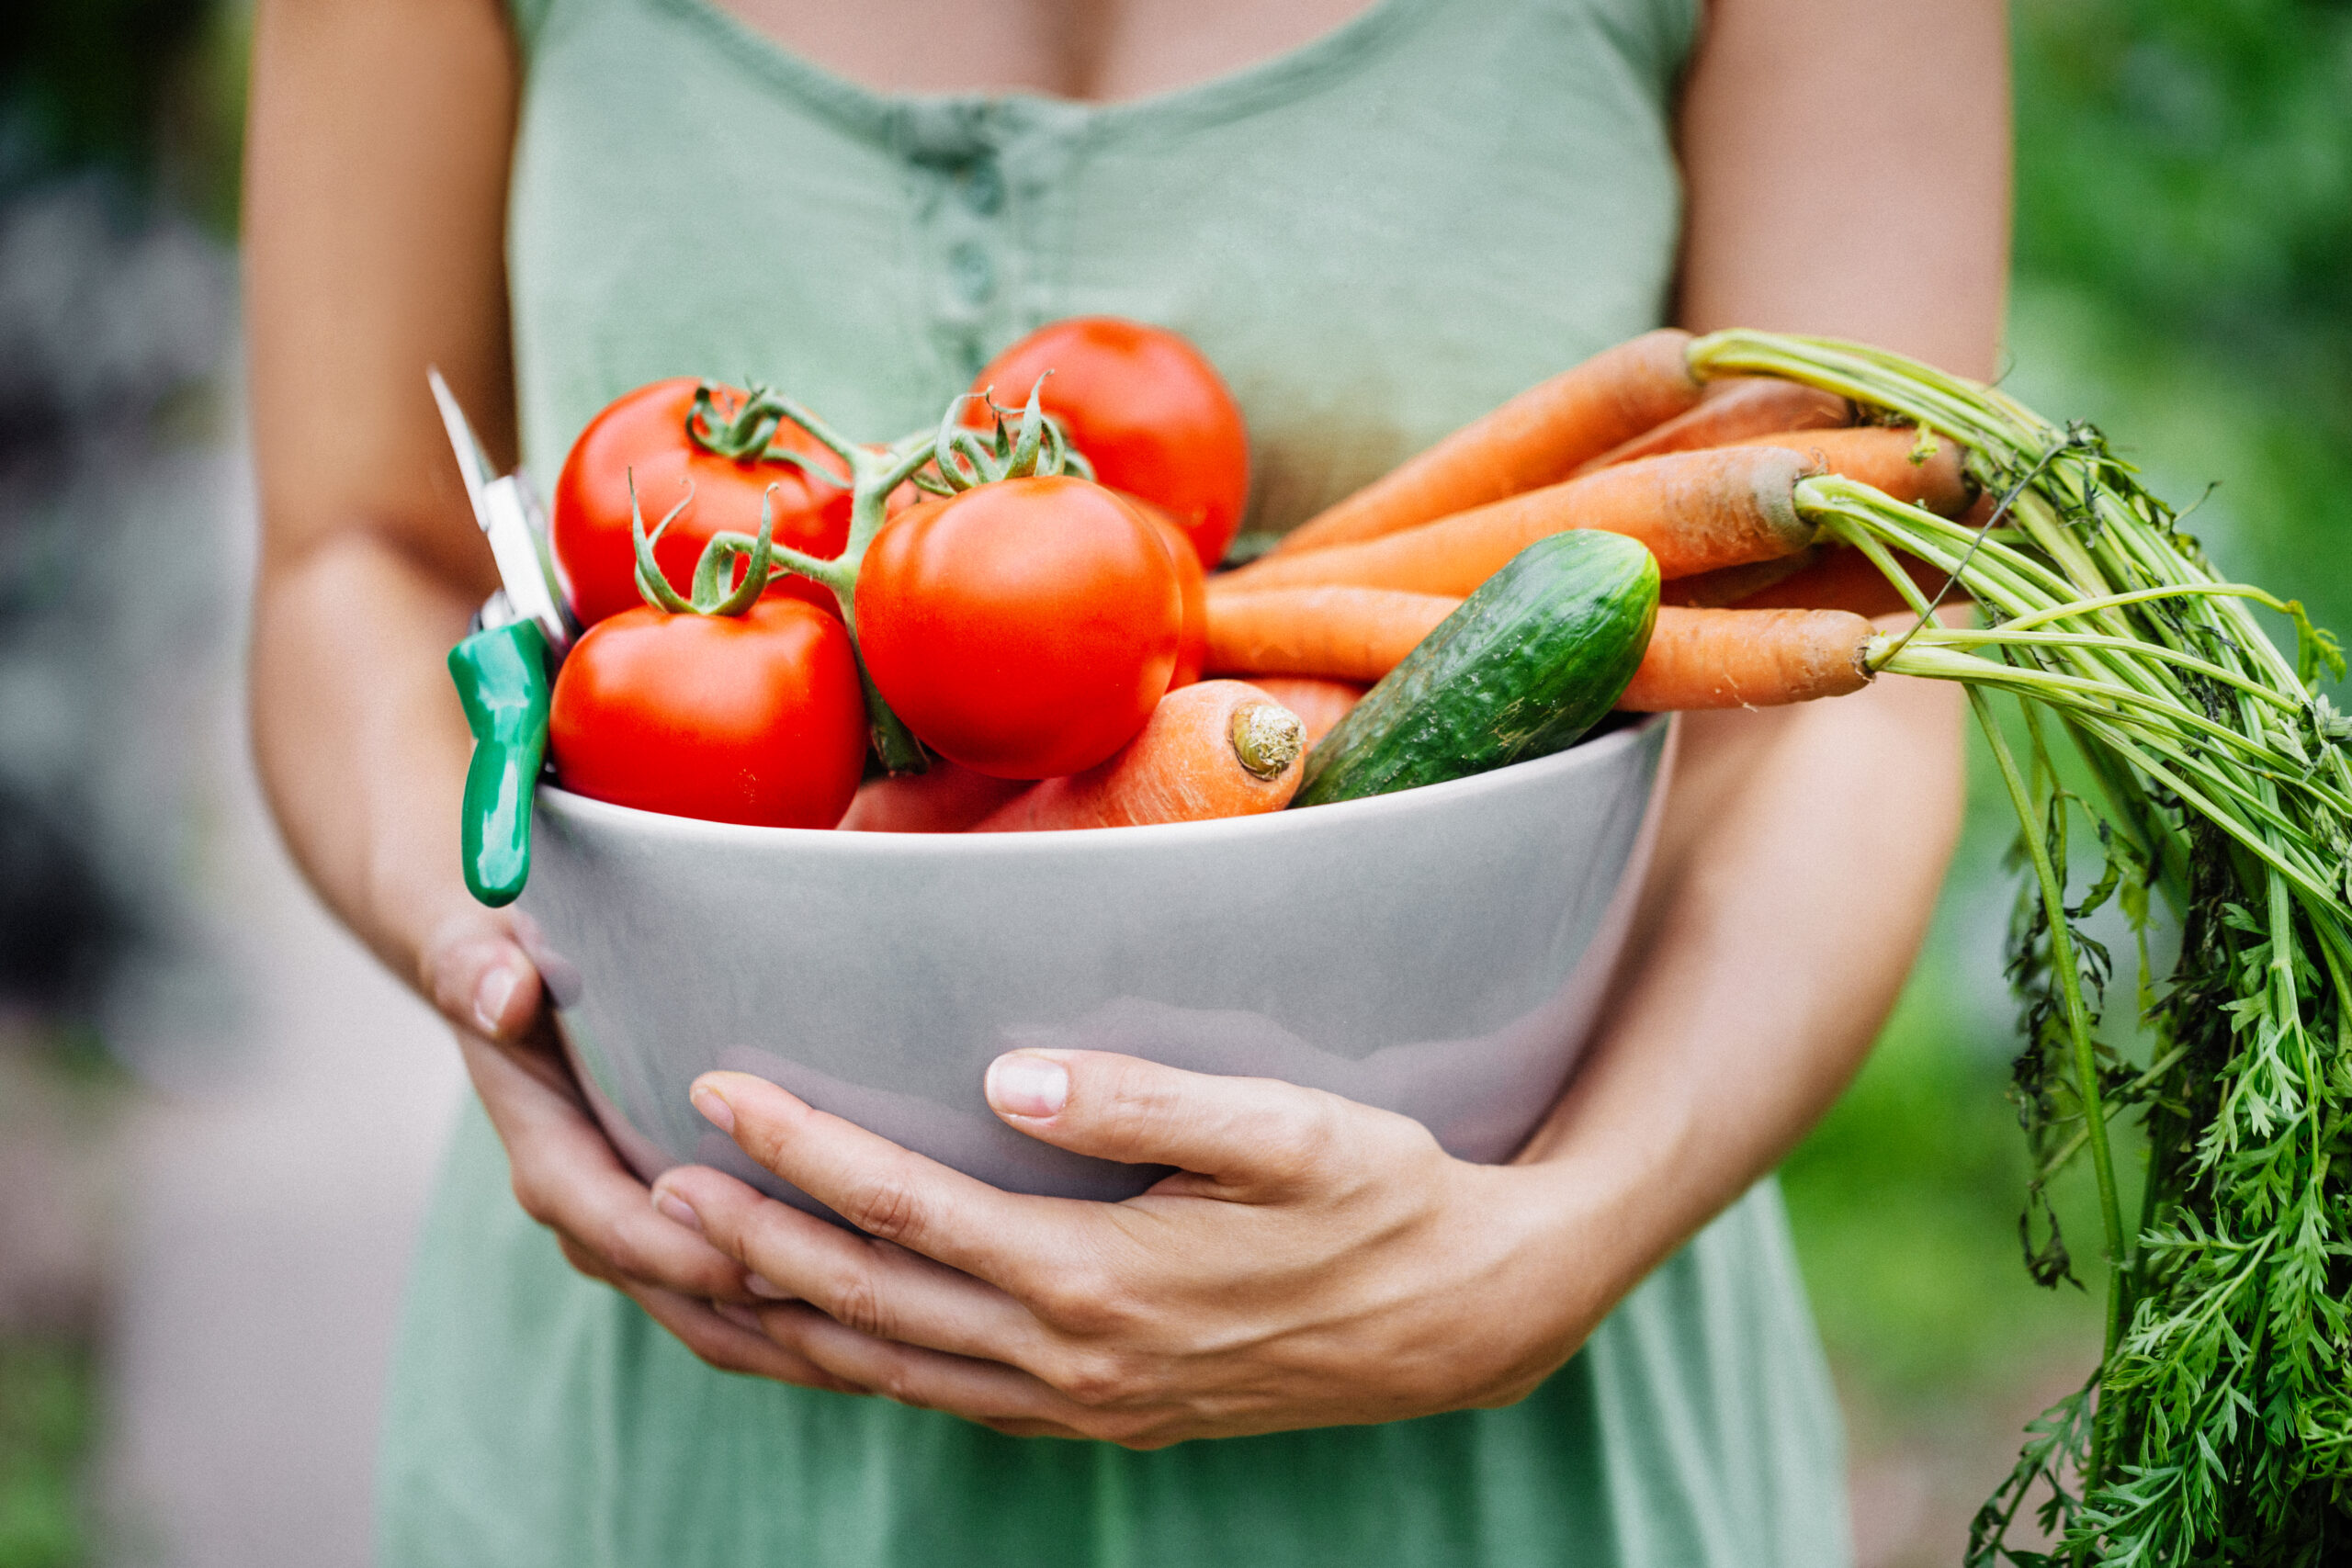 Foods to eat to increase your fertility